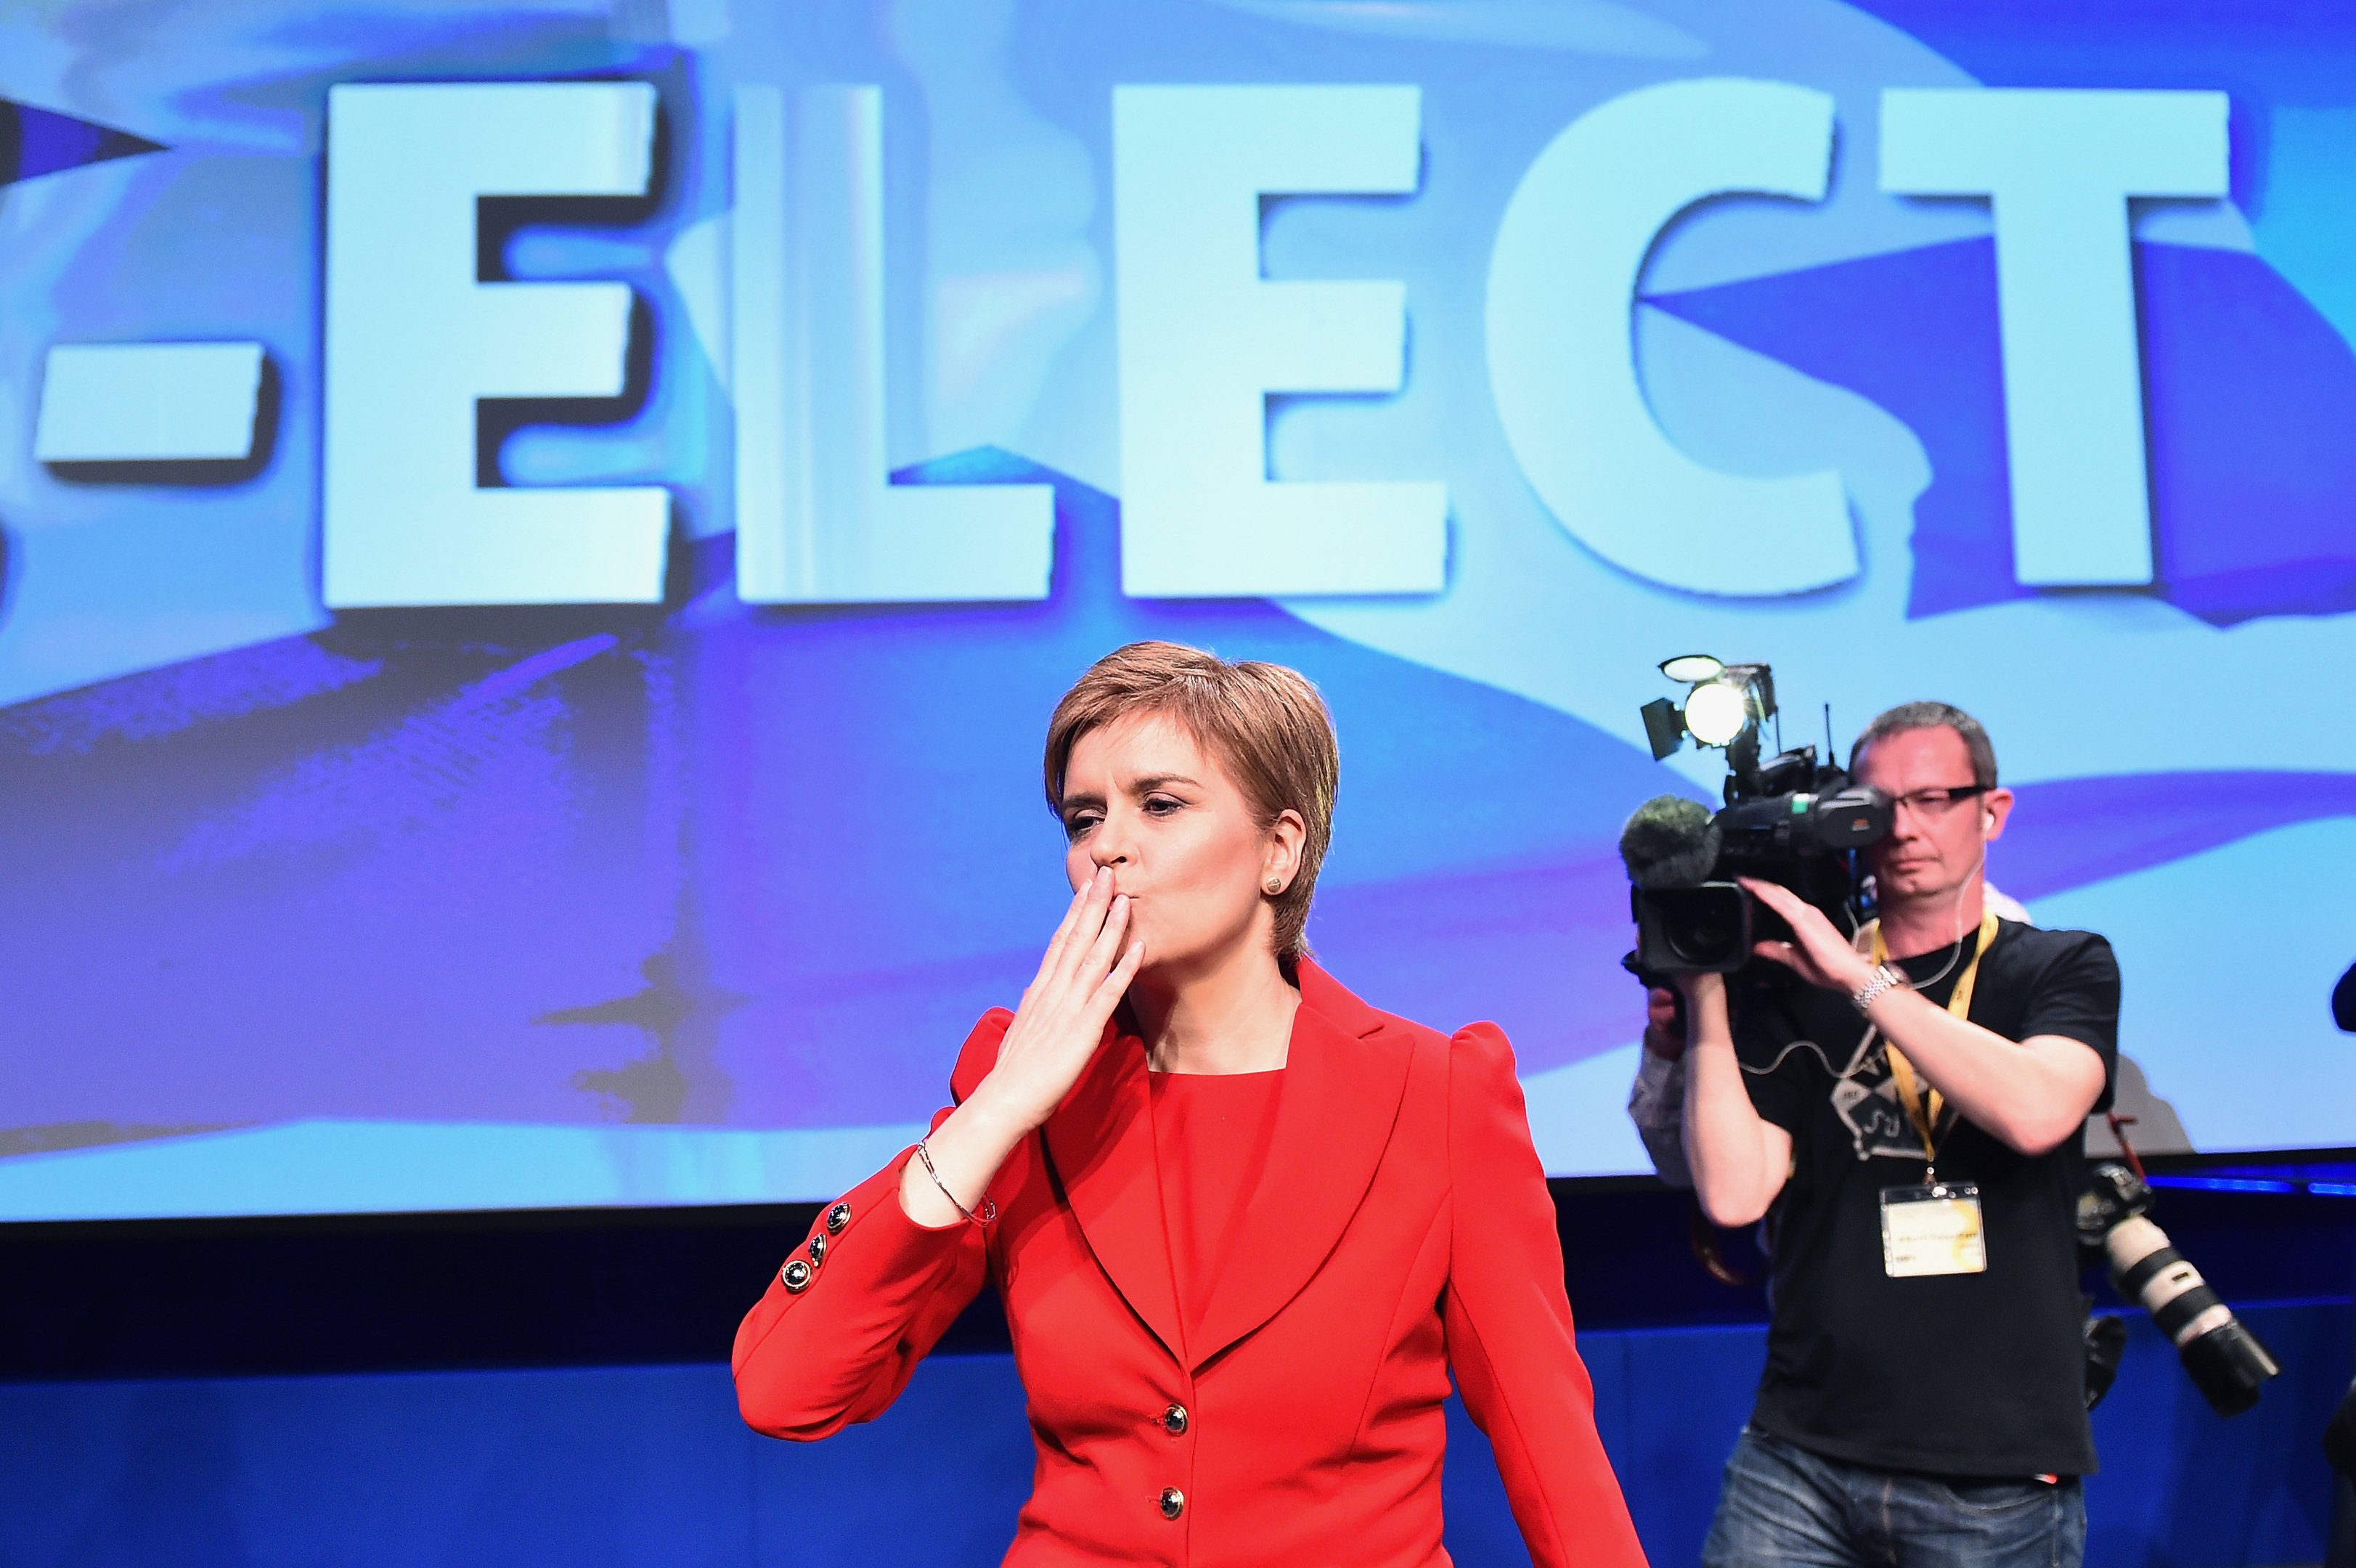 SNP leader Nicola Sturgeon takes applause following delivering her keynote speech to the Scottish National Party Spring conference on March 12, 2016 in Glasgow, Scotland (Jeff J Mitchell)